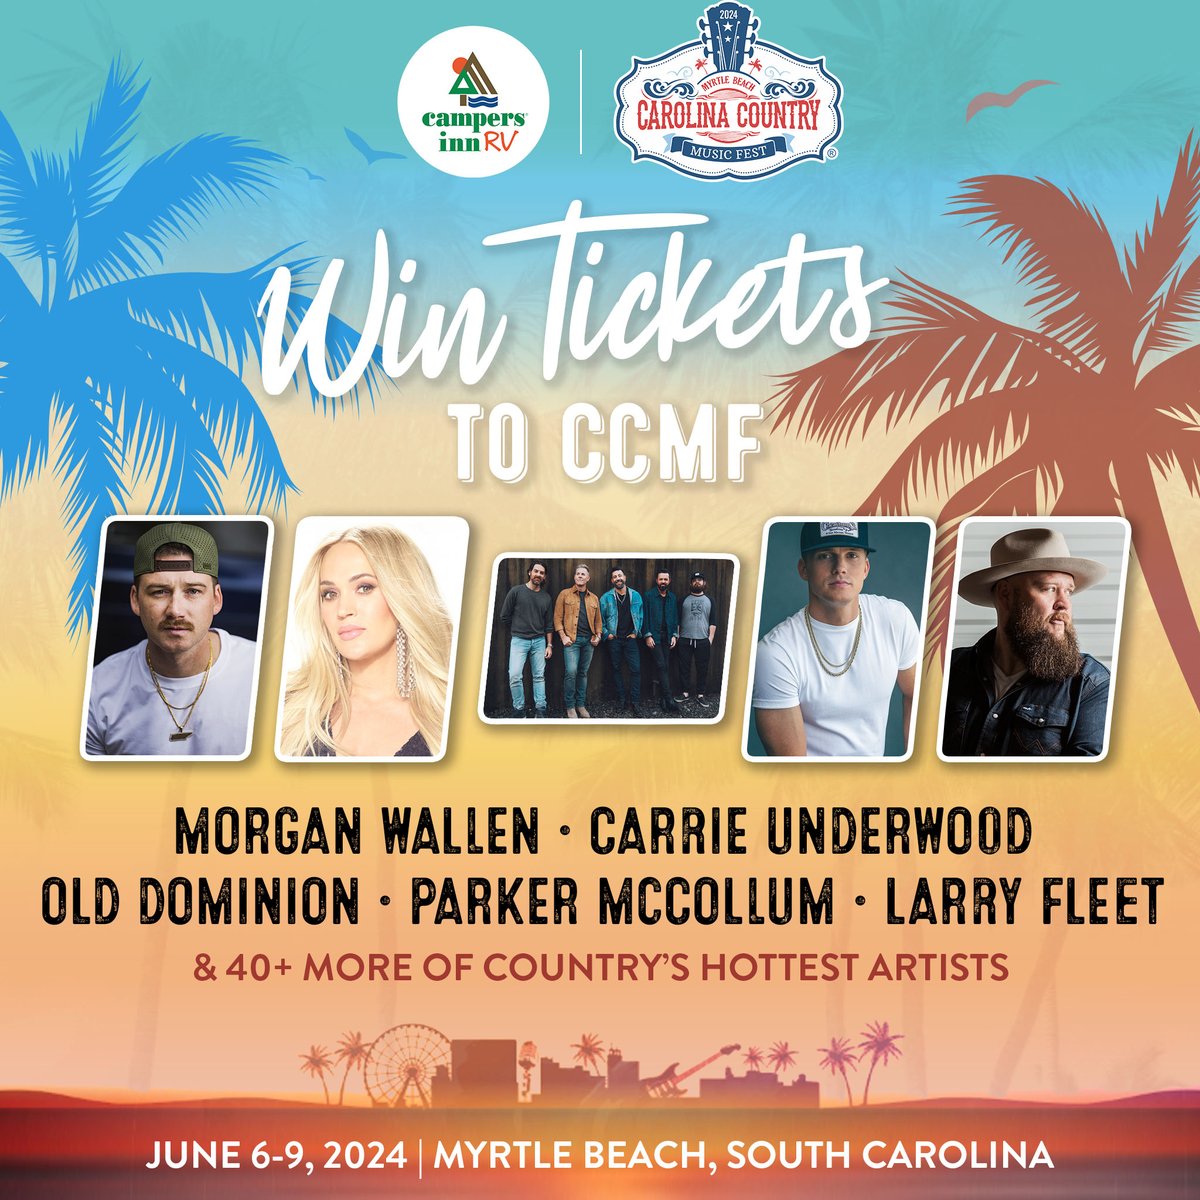 Sign up with @campersinnrv, Now - May 24th, for a chance to win 2 three-day general admission passes for @ccmflive this June, but you must be following them! Learn more and sign up here >> info.campersinn.com/ccmf-2024 #Campersinn #CCMF #CountryMusic